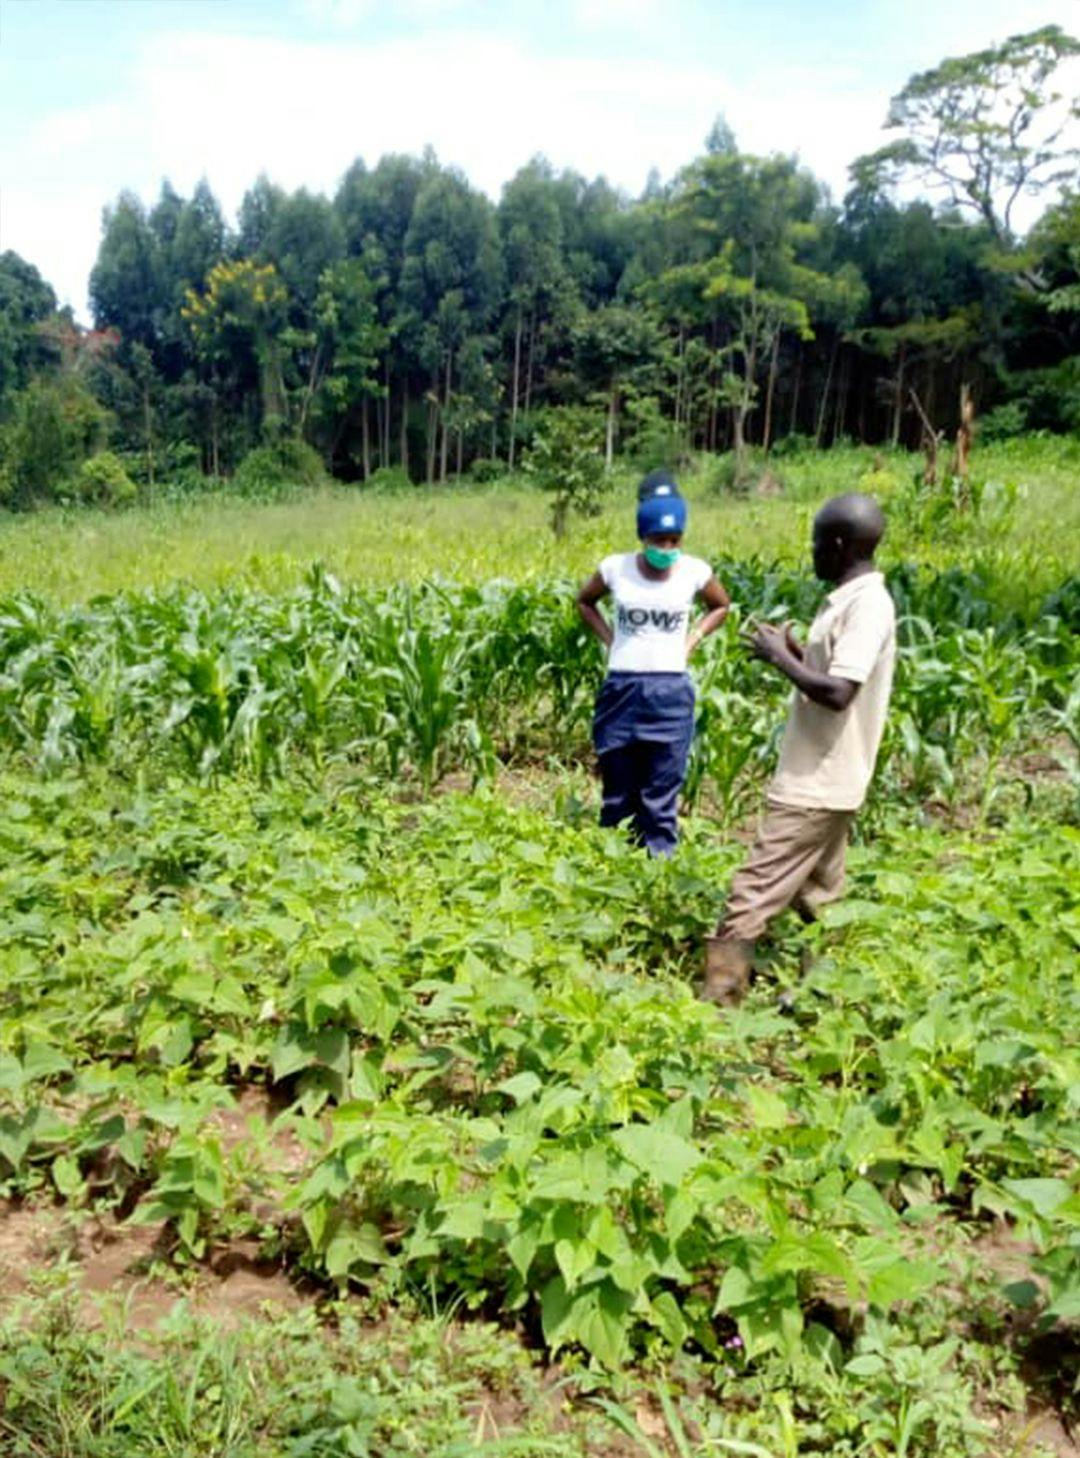 Jackie discussing progress of beans and maize at a demonstration plot.